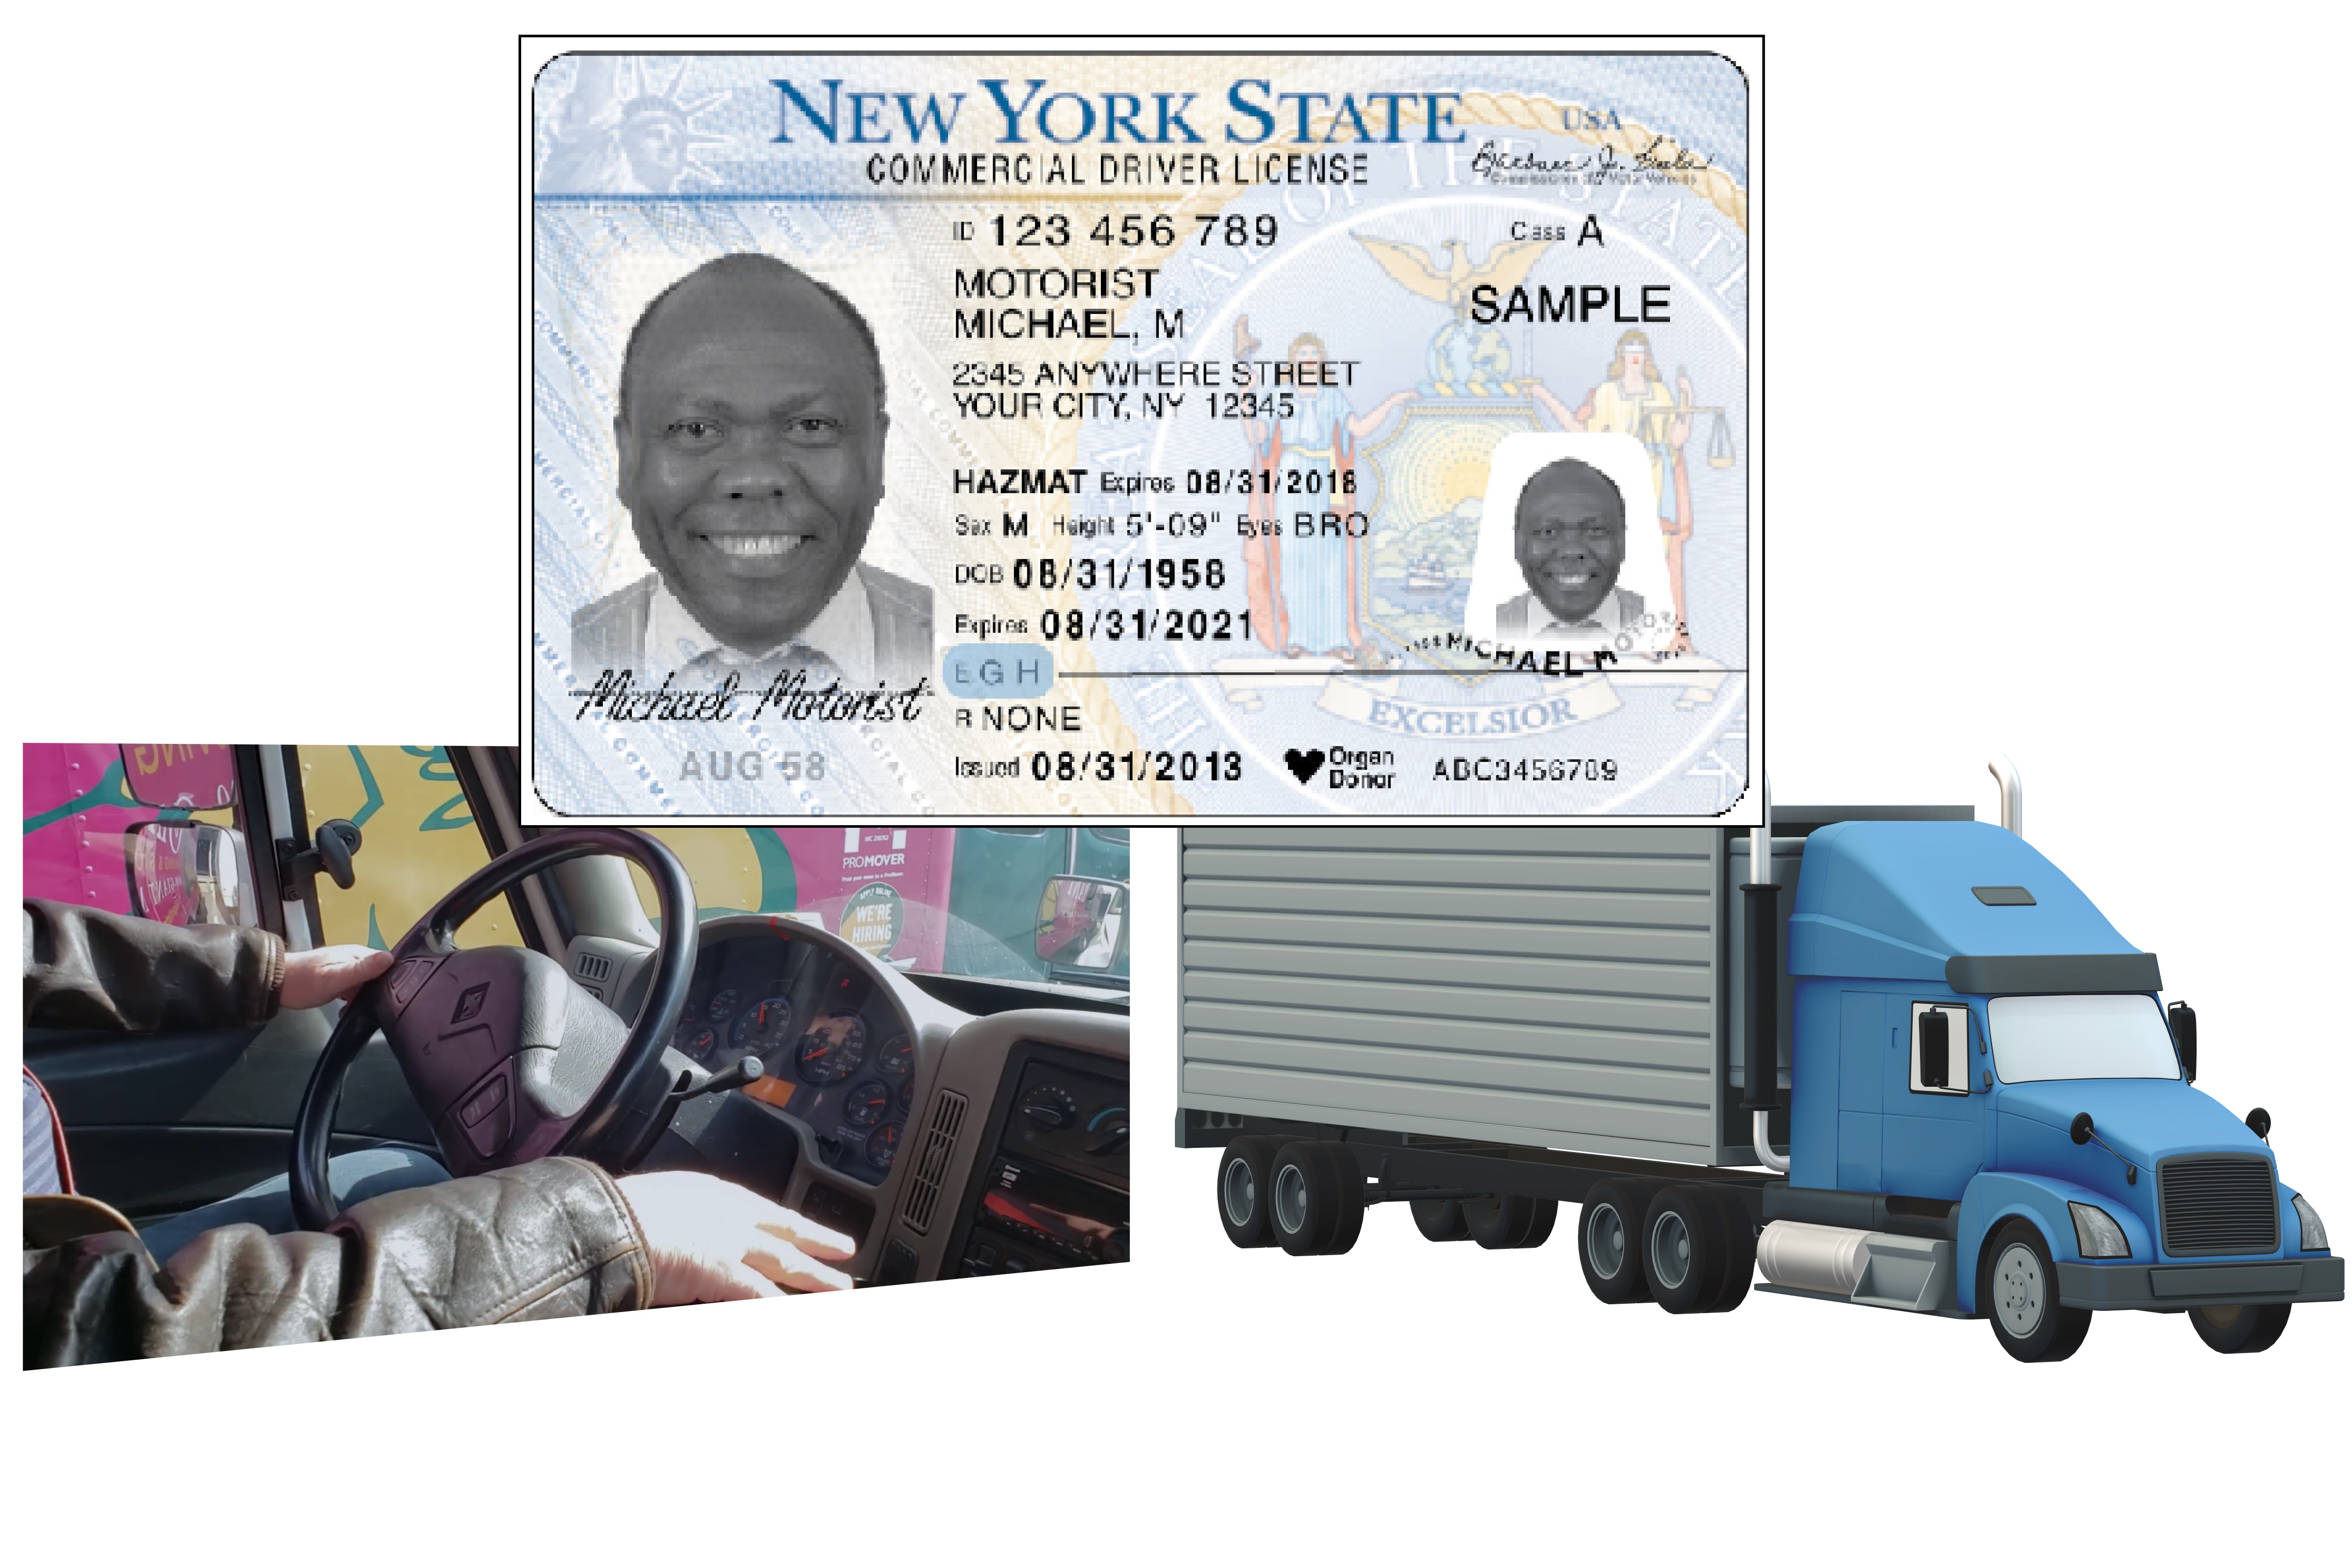 CDL Process - how to get CDL License in New York